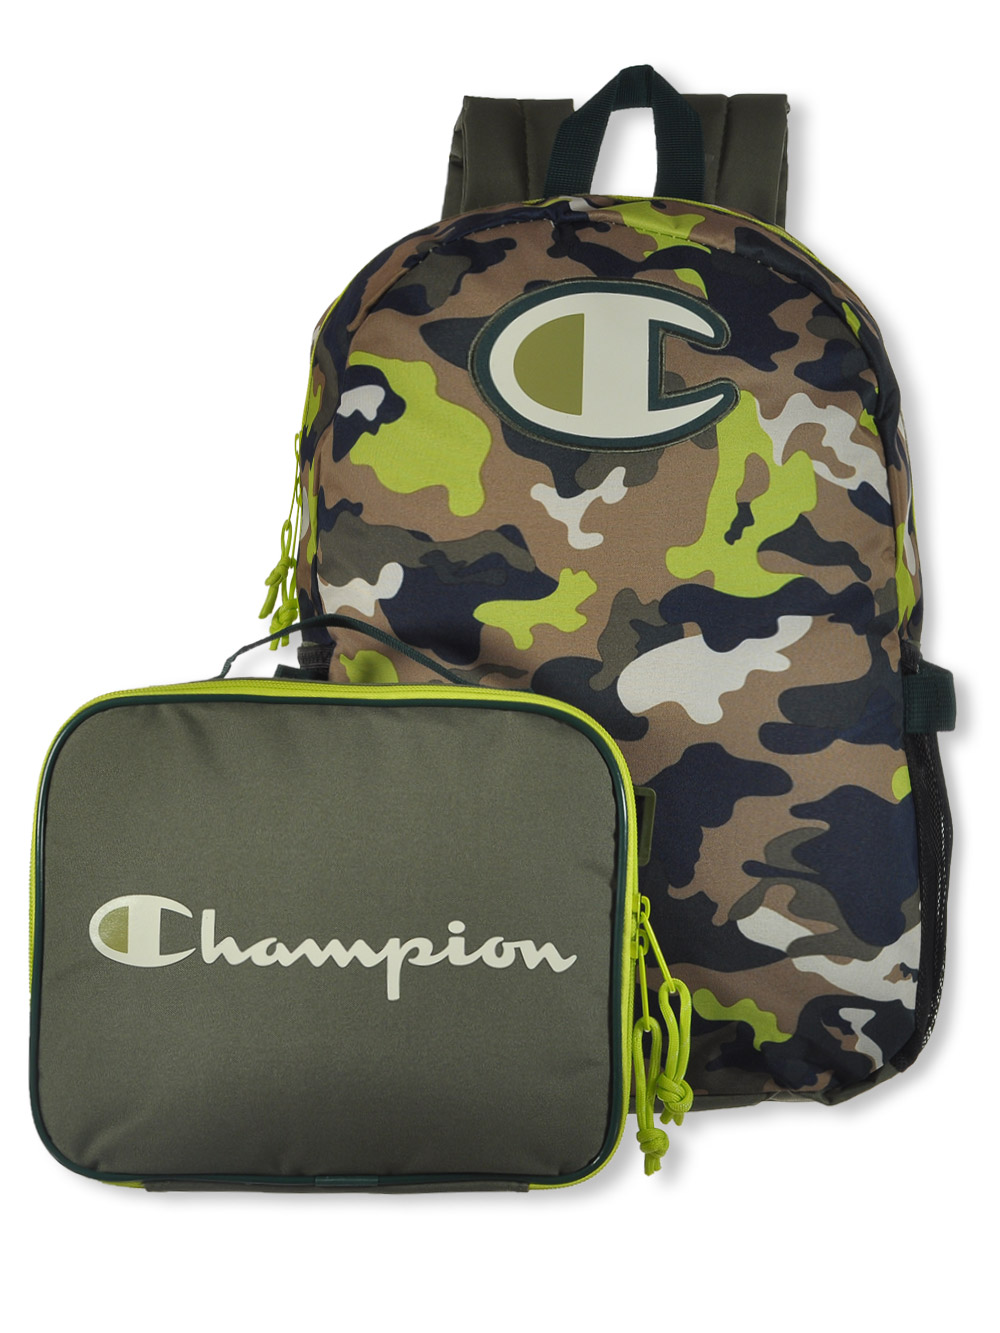 Camo Backpack and Lunchbox for Boys Back to School